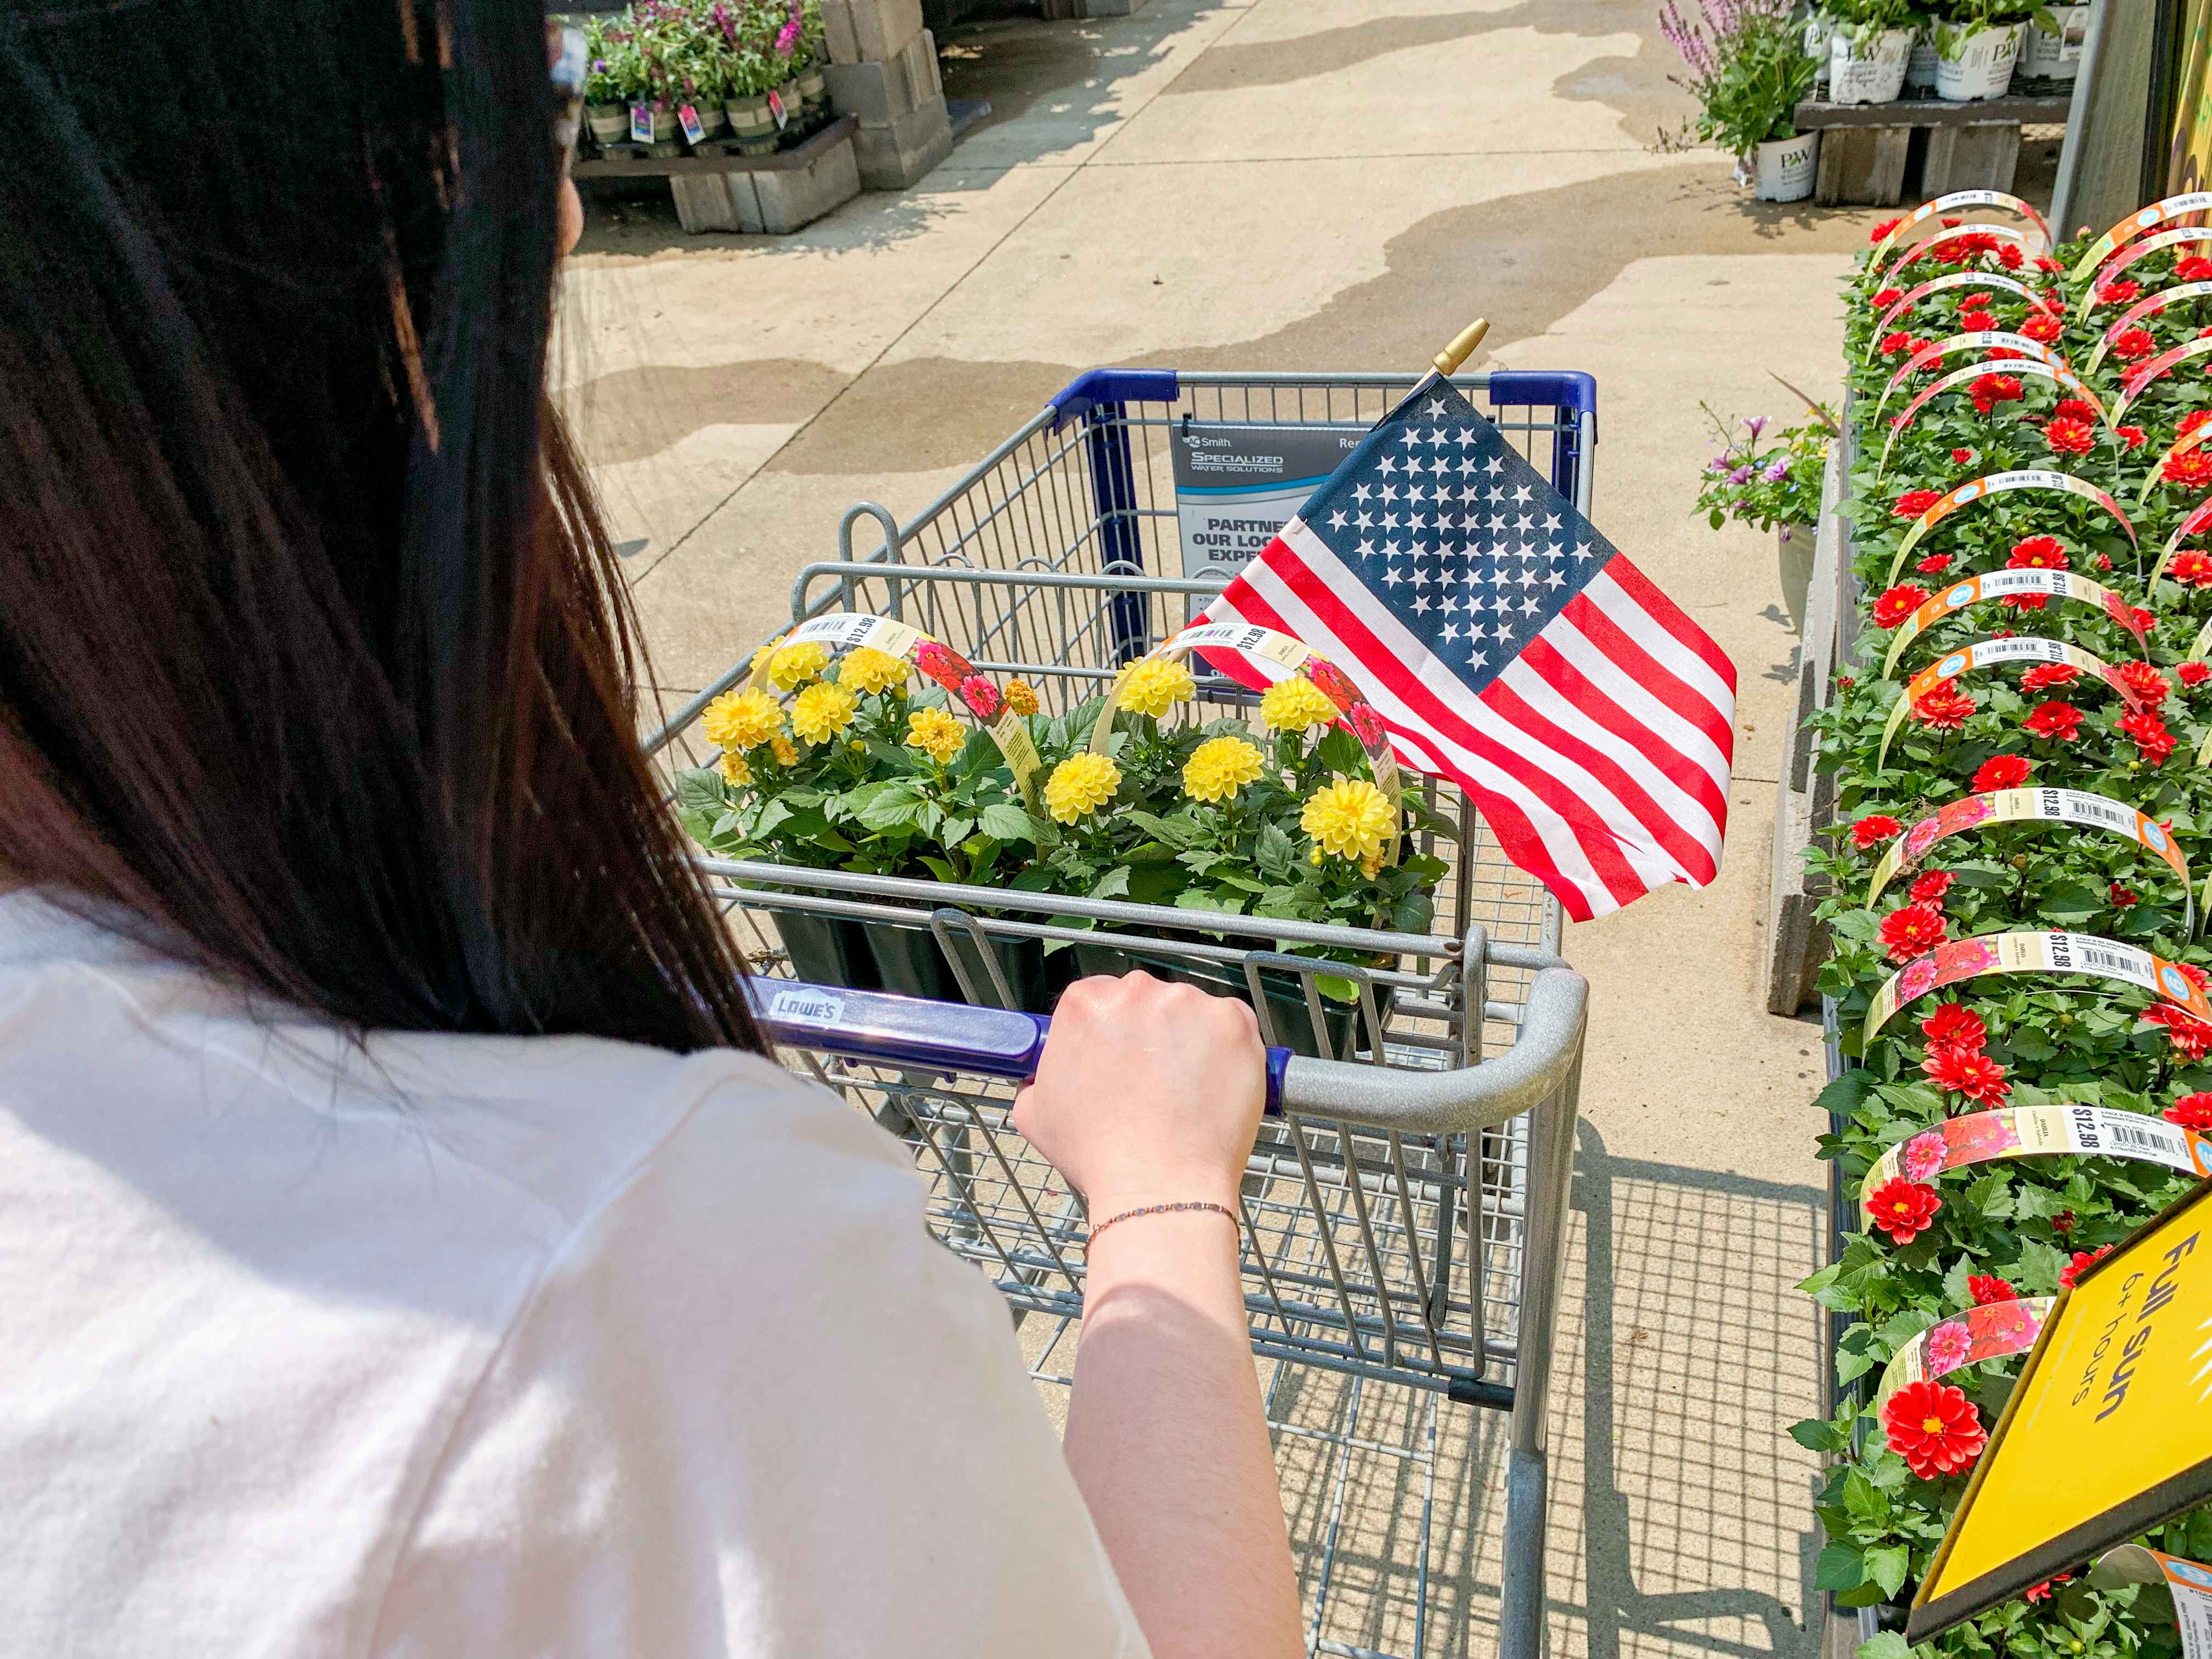 a person pushing a cart full of flowers and an american flag at lowe's